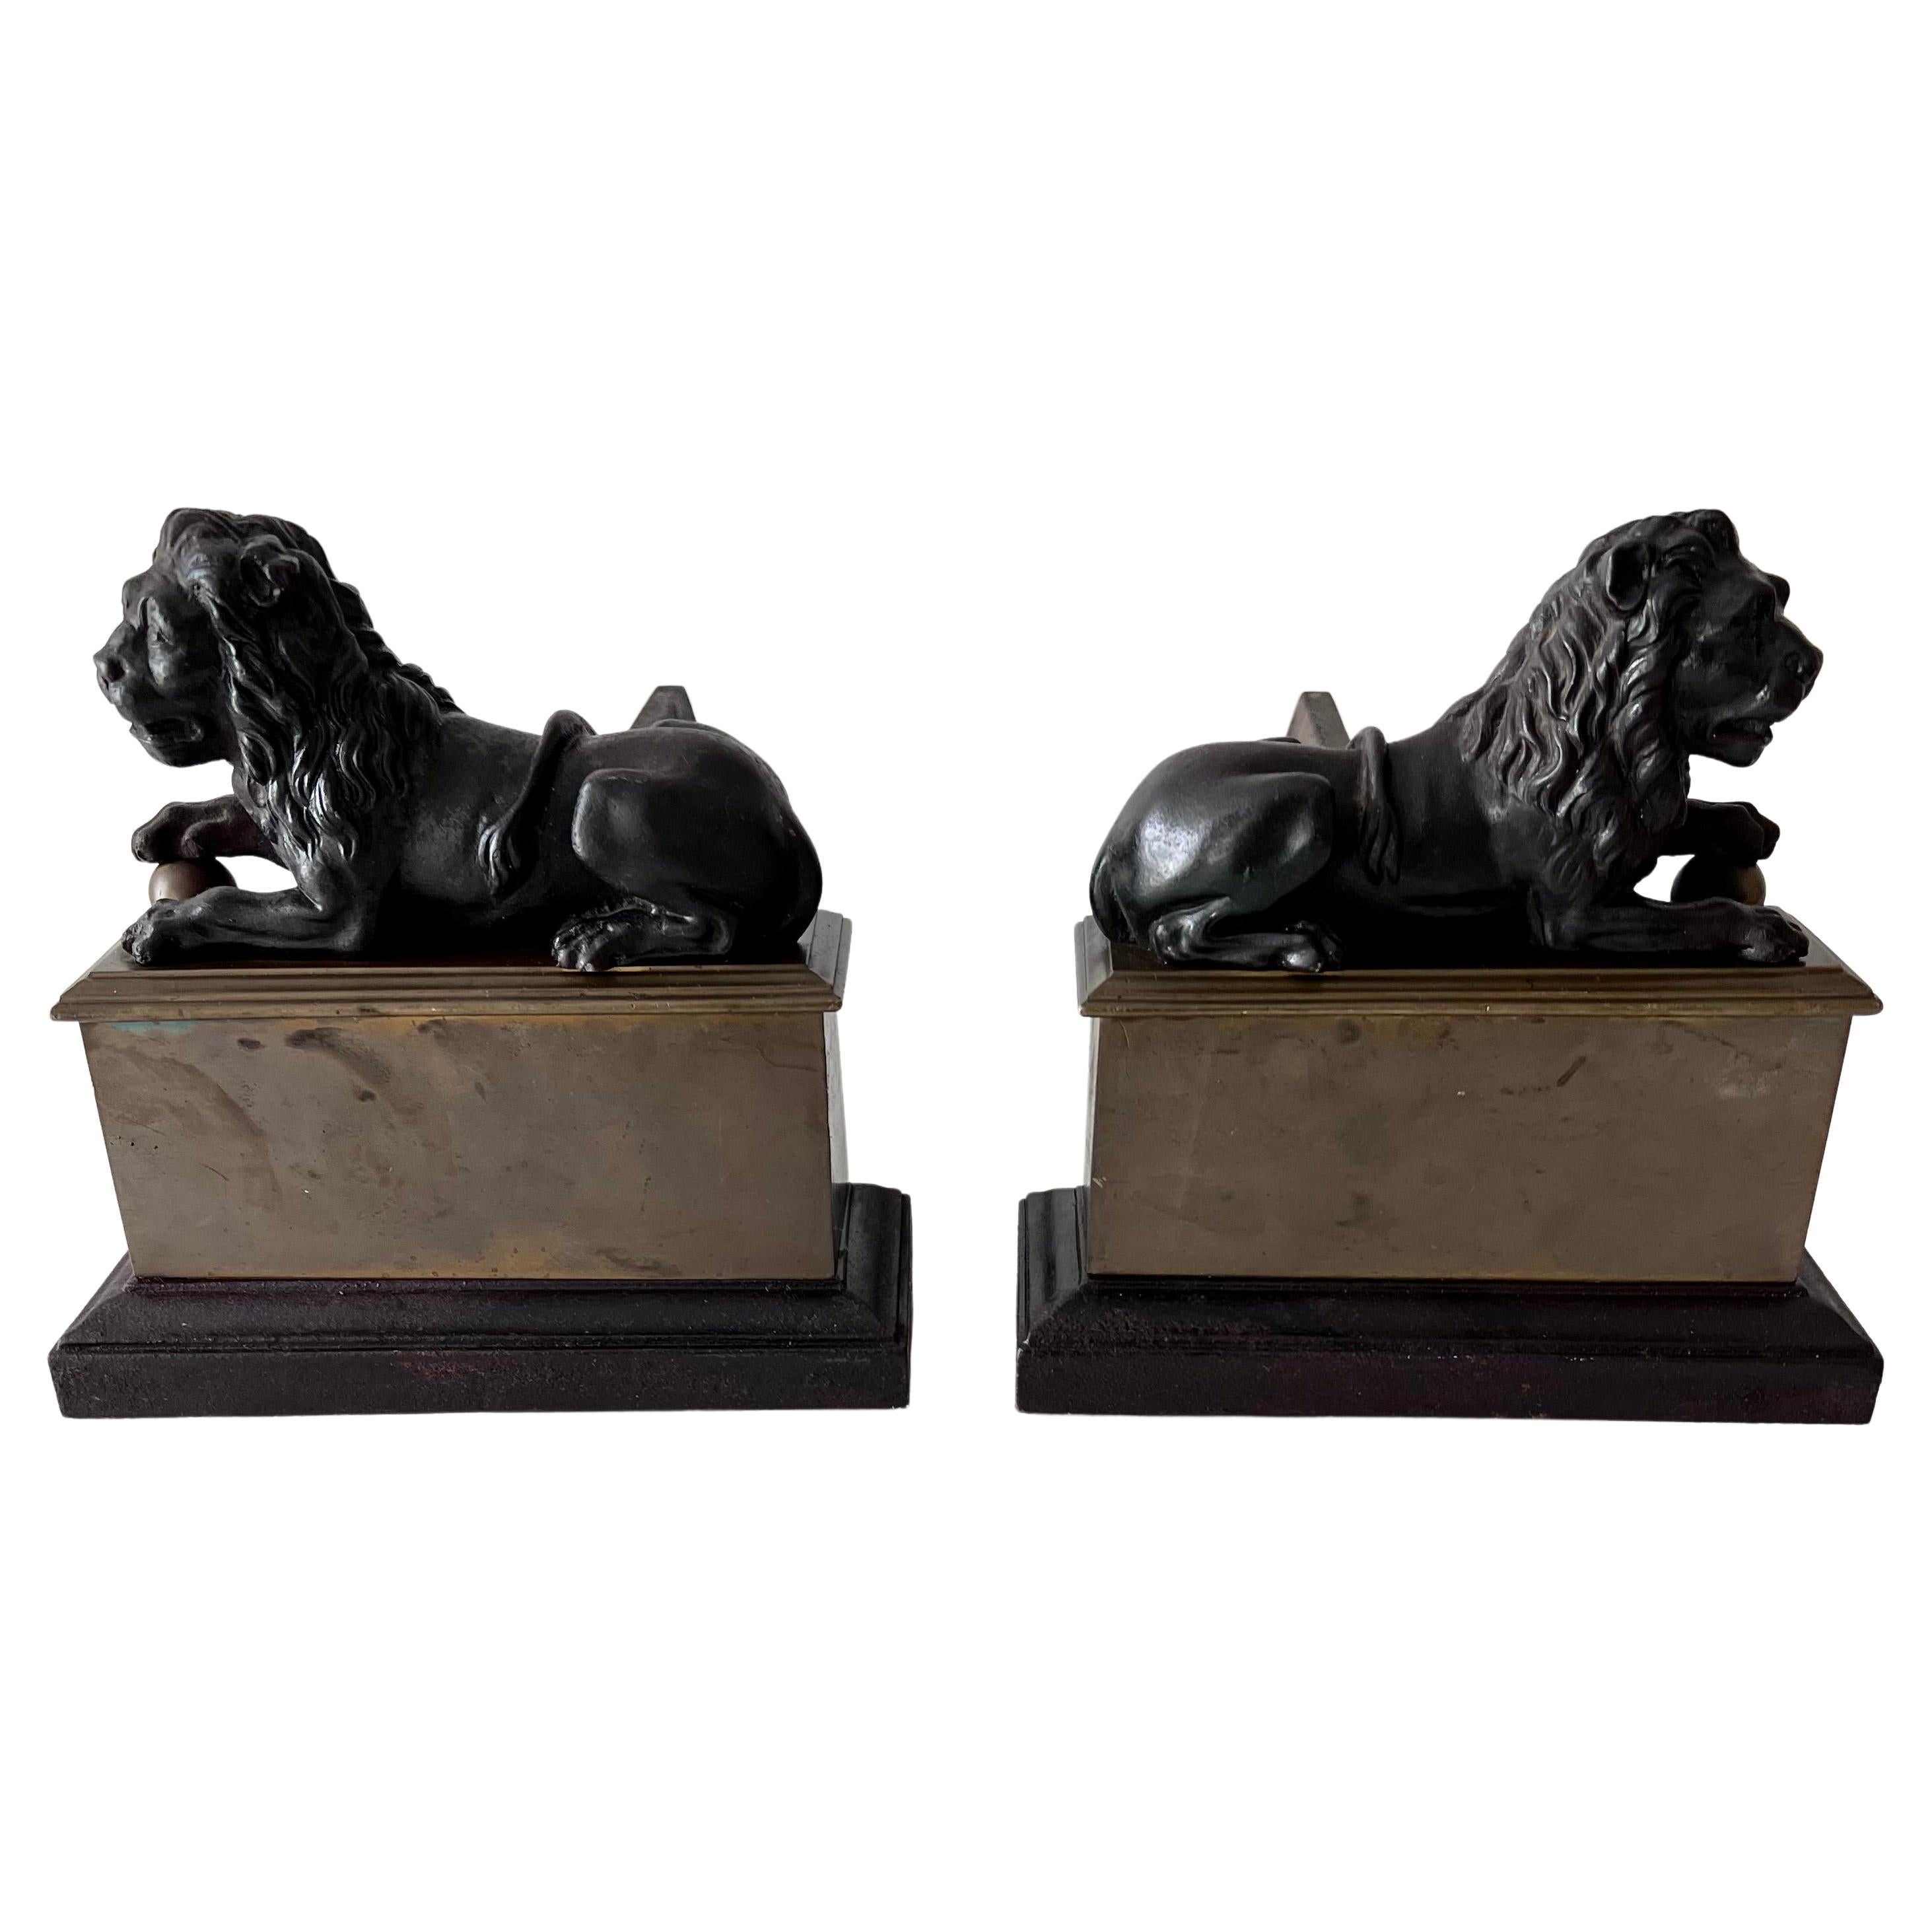 A spectacular pair of reclining wrought iron lions atop a square brass base with wrought Iron billets. The pair are rare, as we have not seen lions reclining. The look is very traditional French, however works in many spaces... the lions are nicely